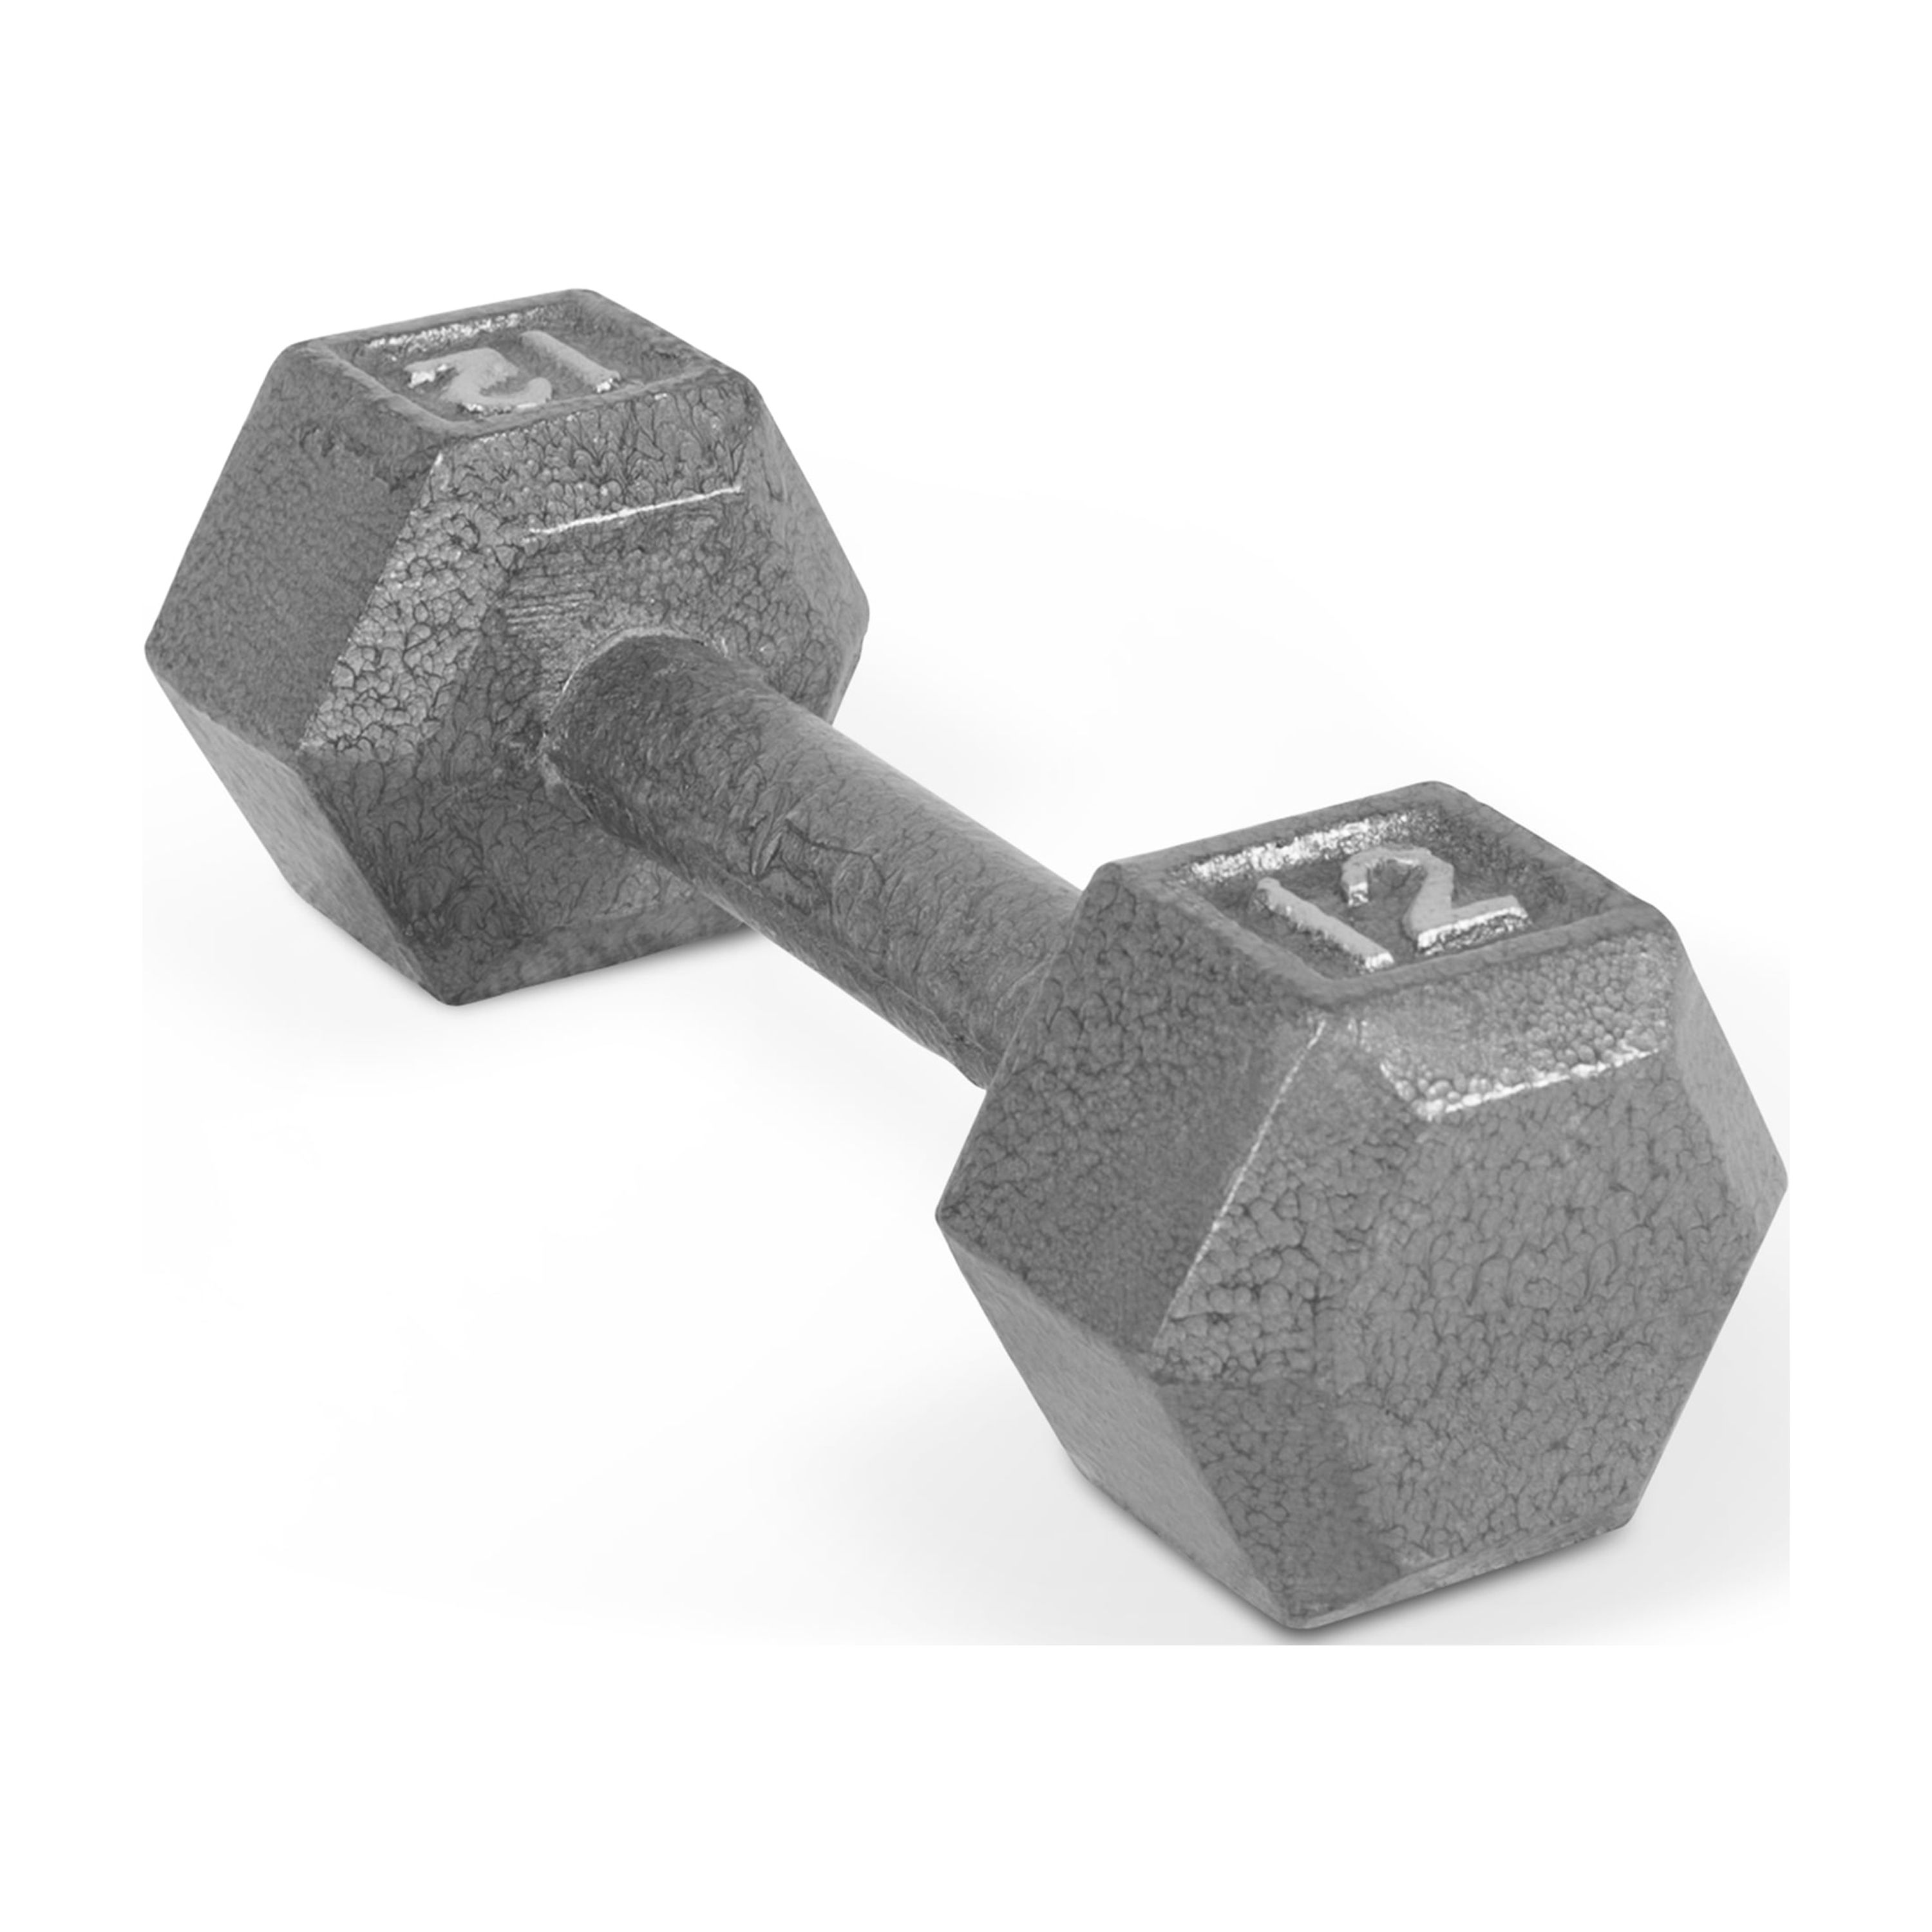 CAP Barbell 12lb Cast Iron Hex Dumbbell, Single - image 1 of 6